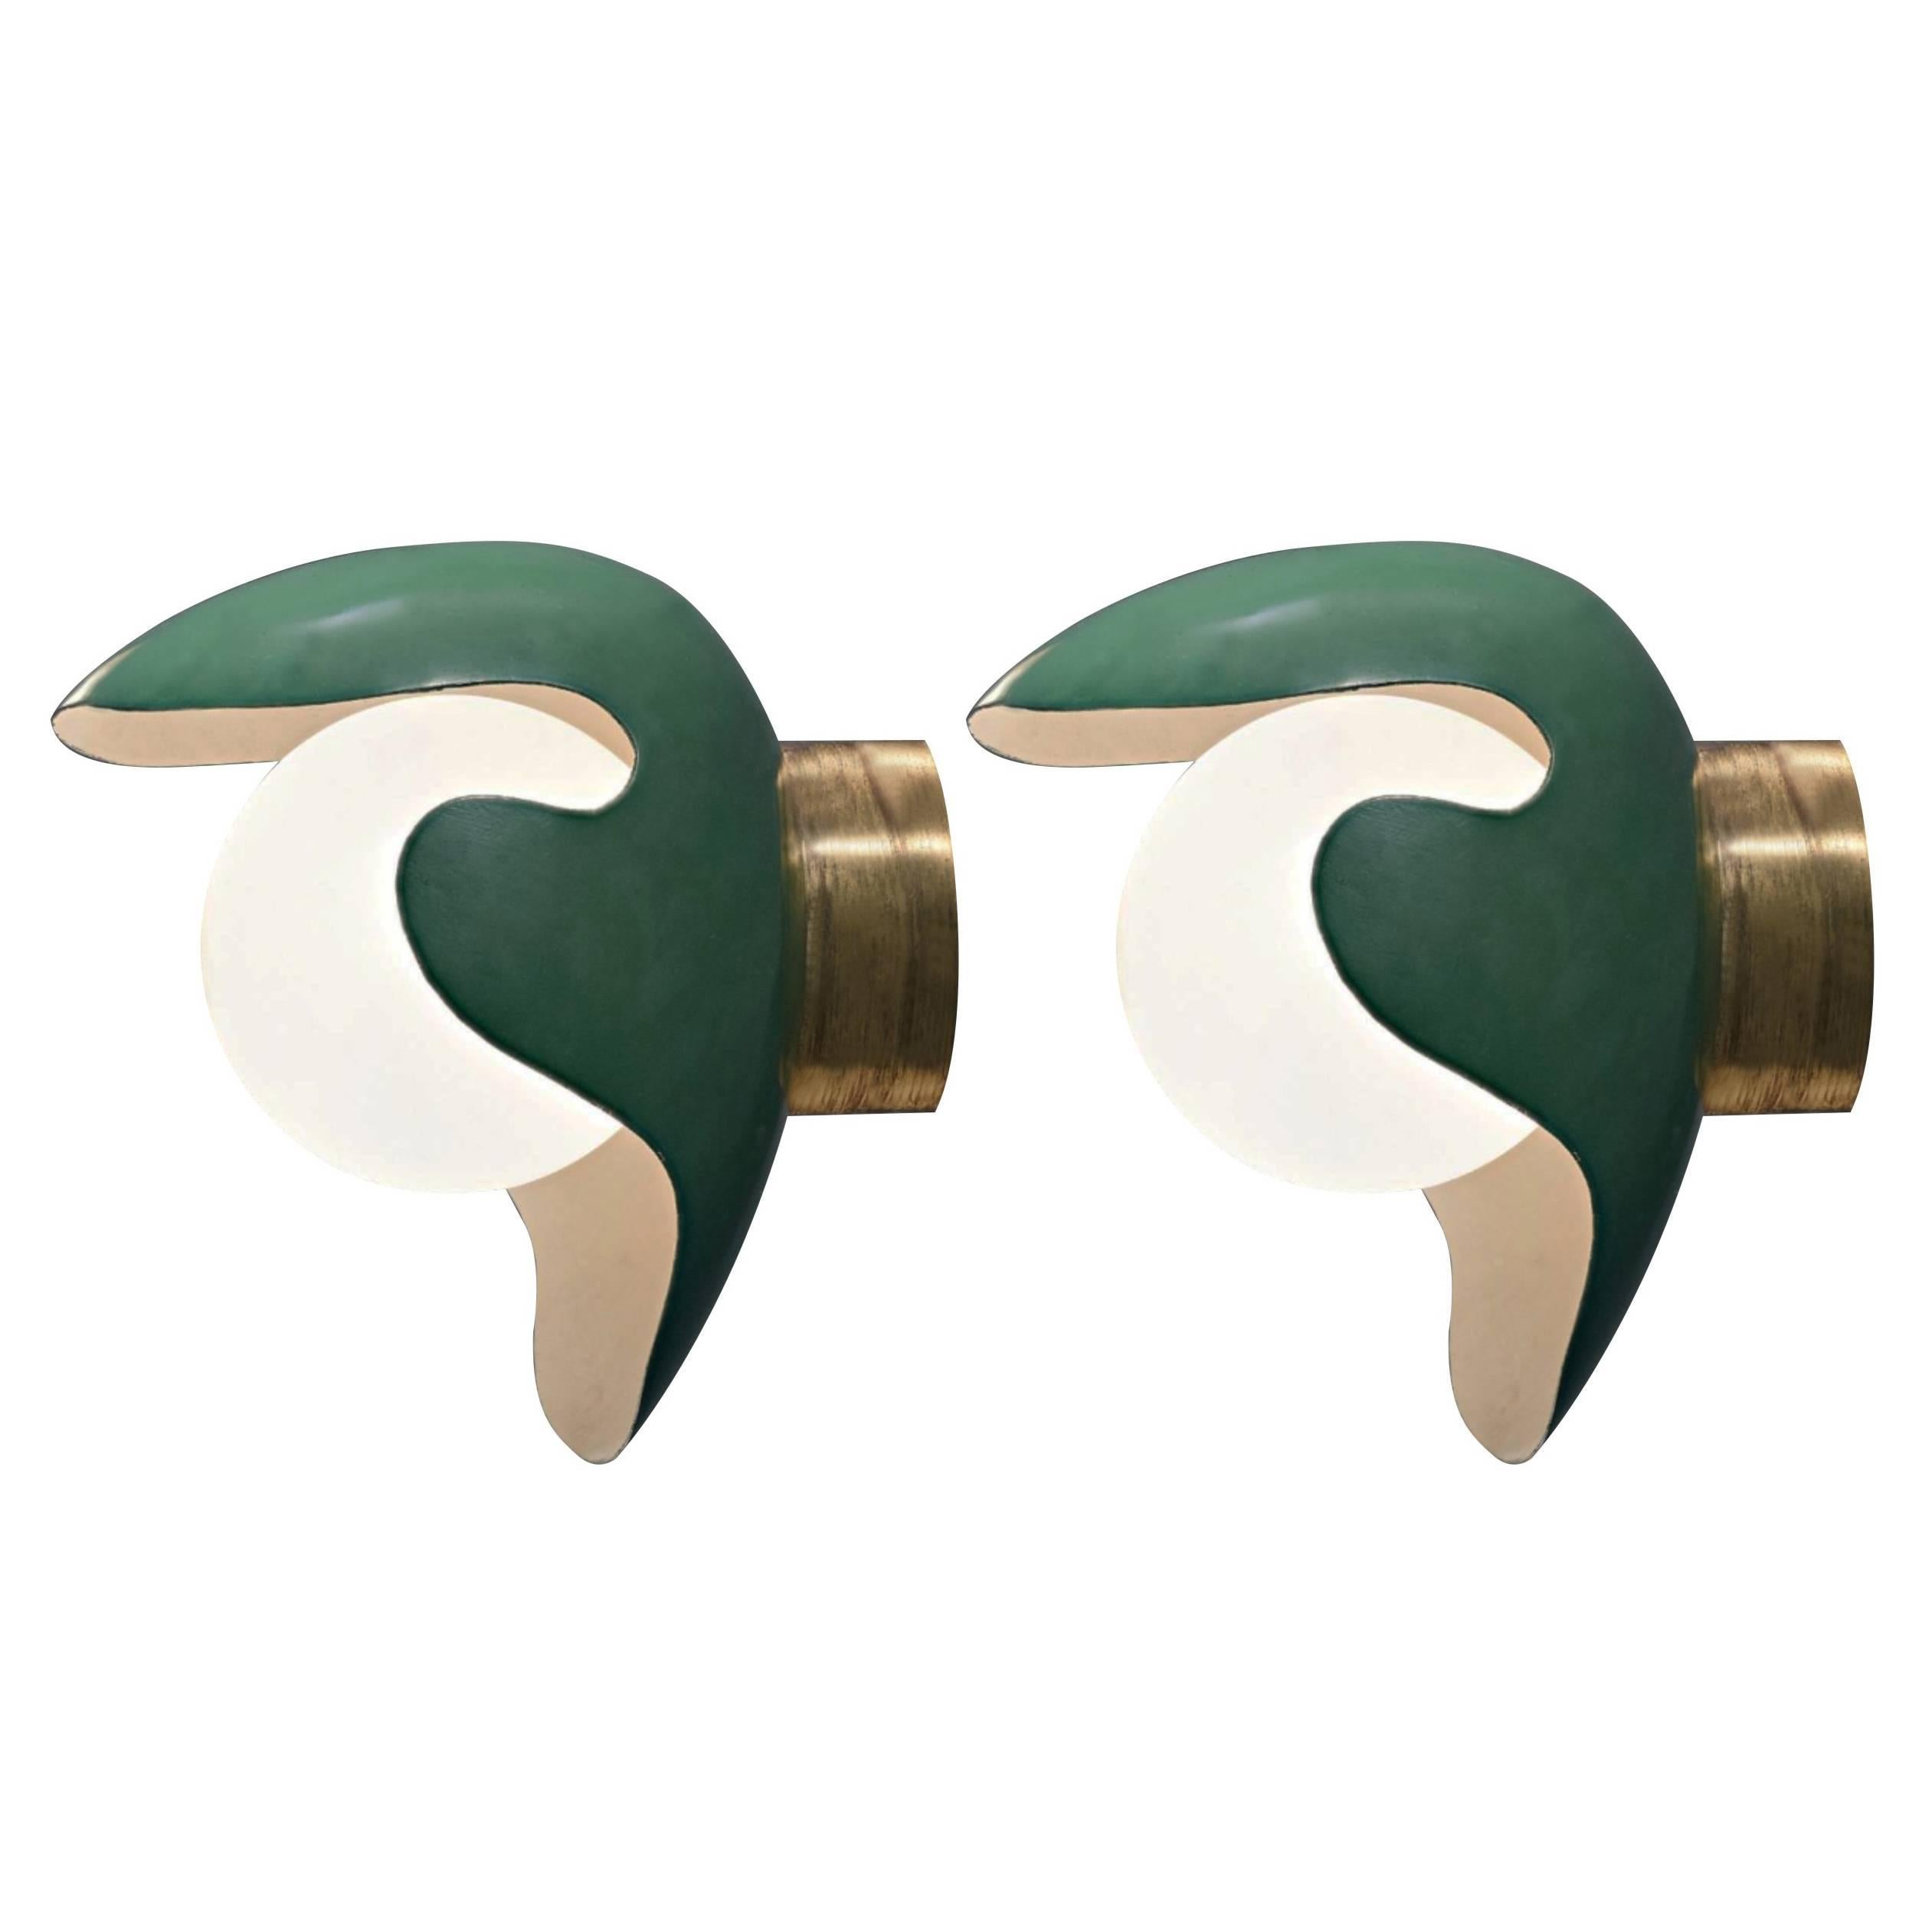 Pair of Palle Suenson Sconces Designed for Aarhus Oil Factory A/S Canteen For Sale